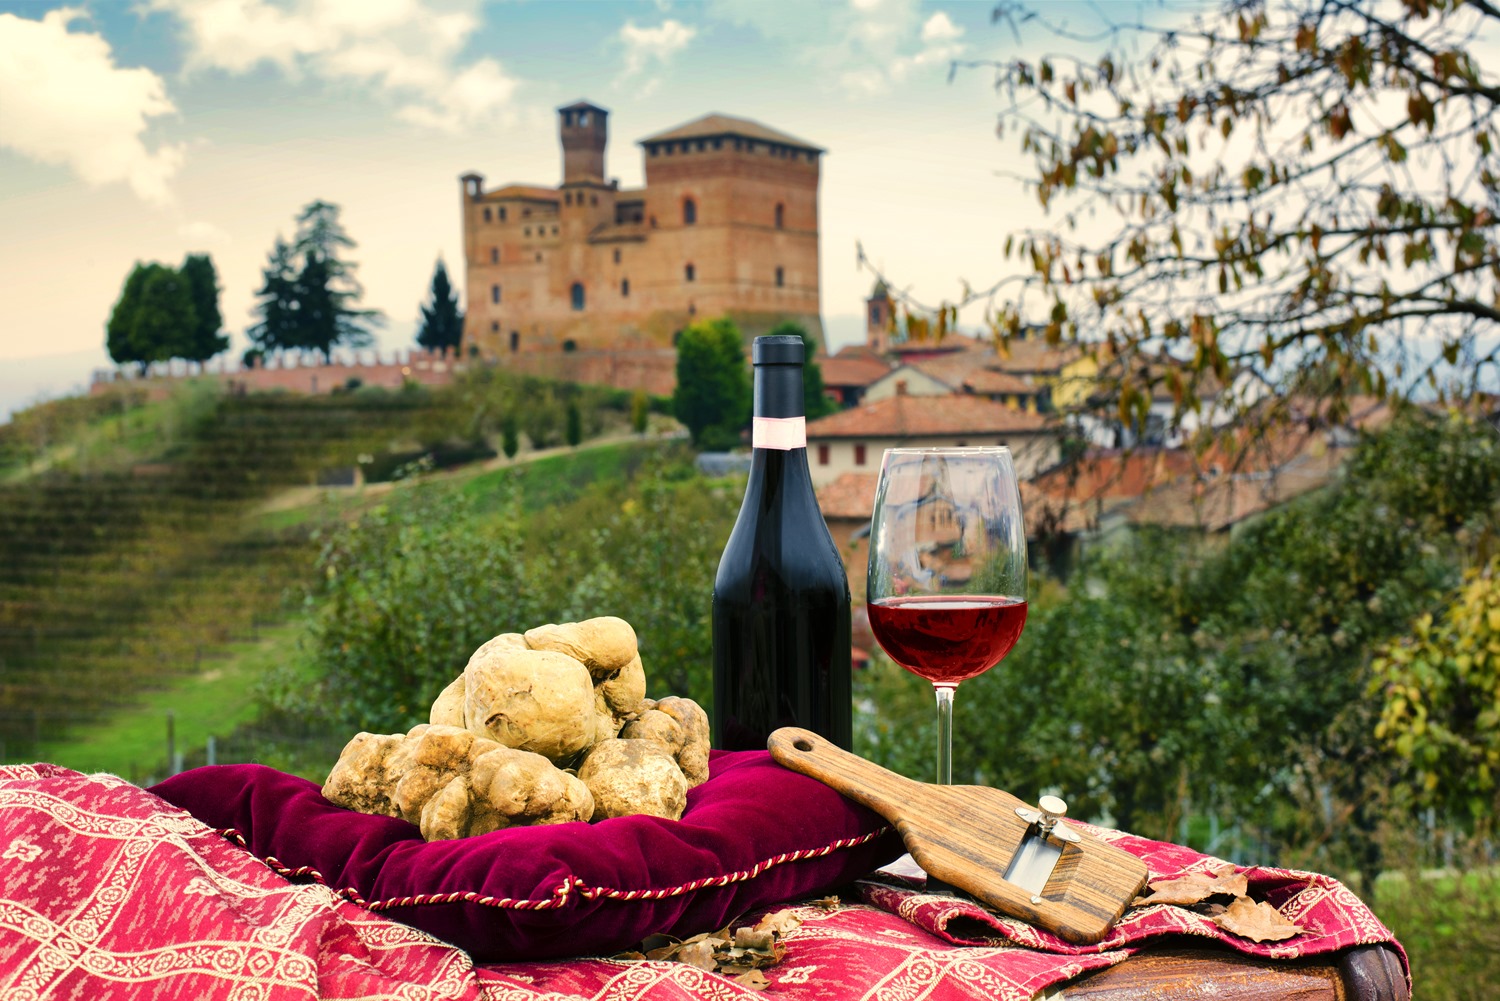 Truffle Festivals in Italy Where to Go, Eat, and Hunt in the Fall